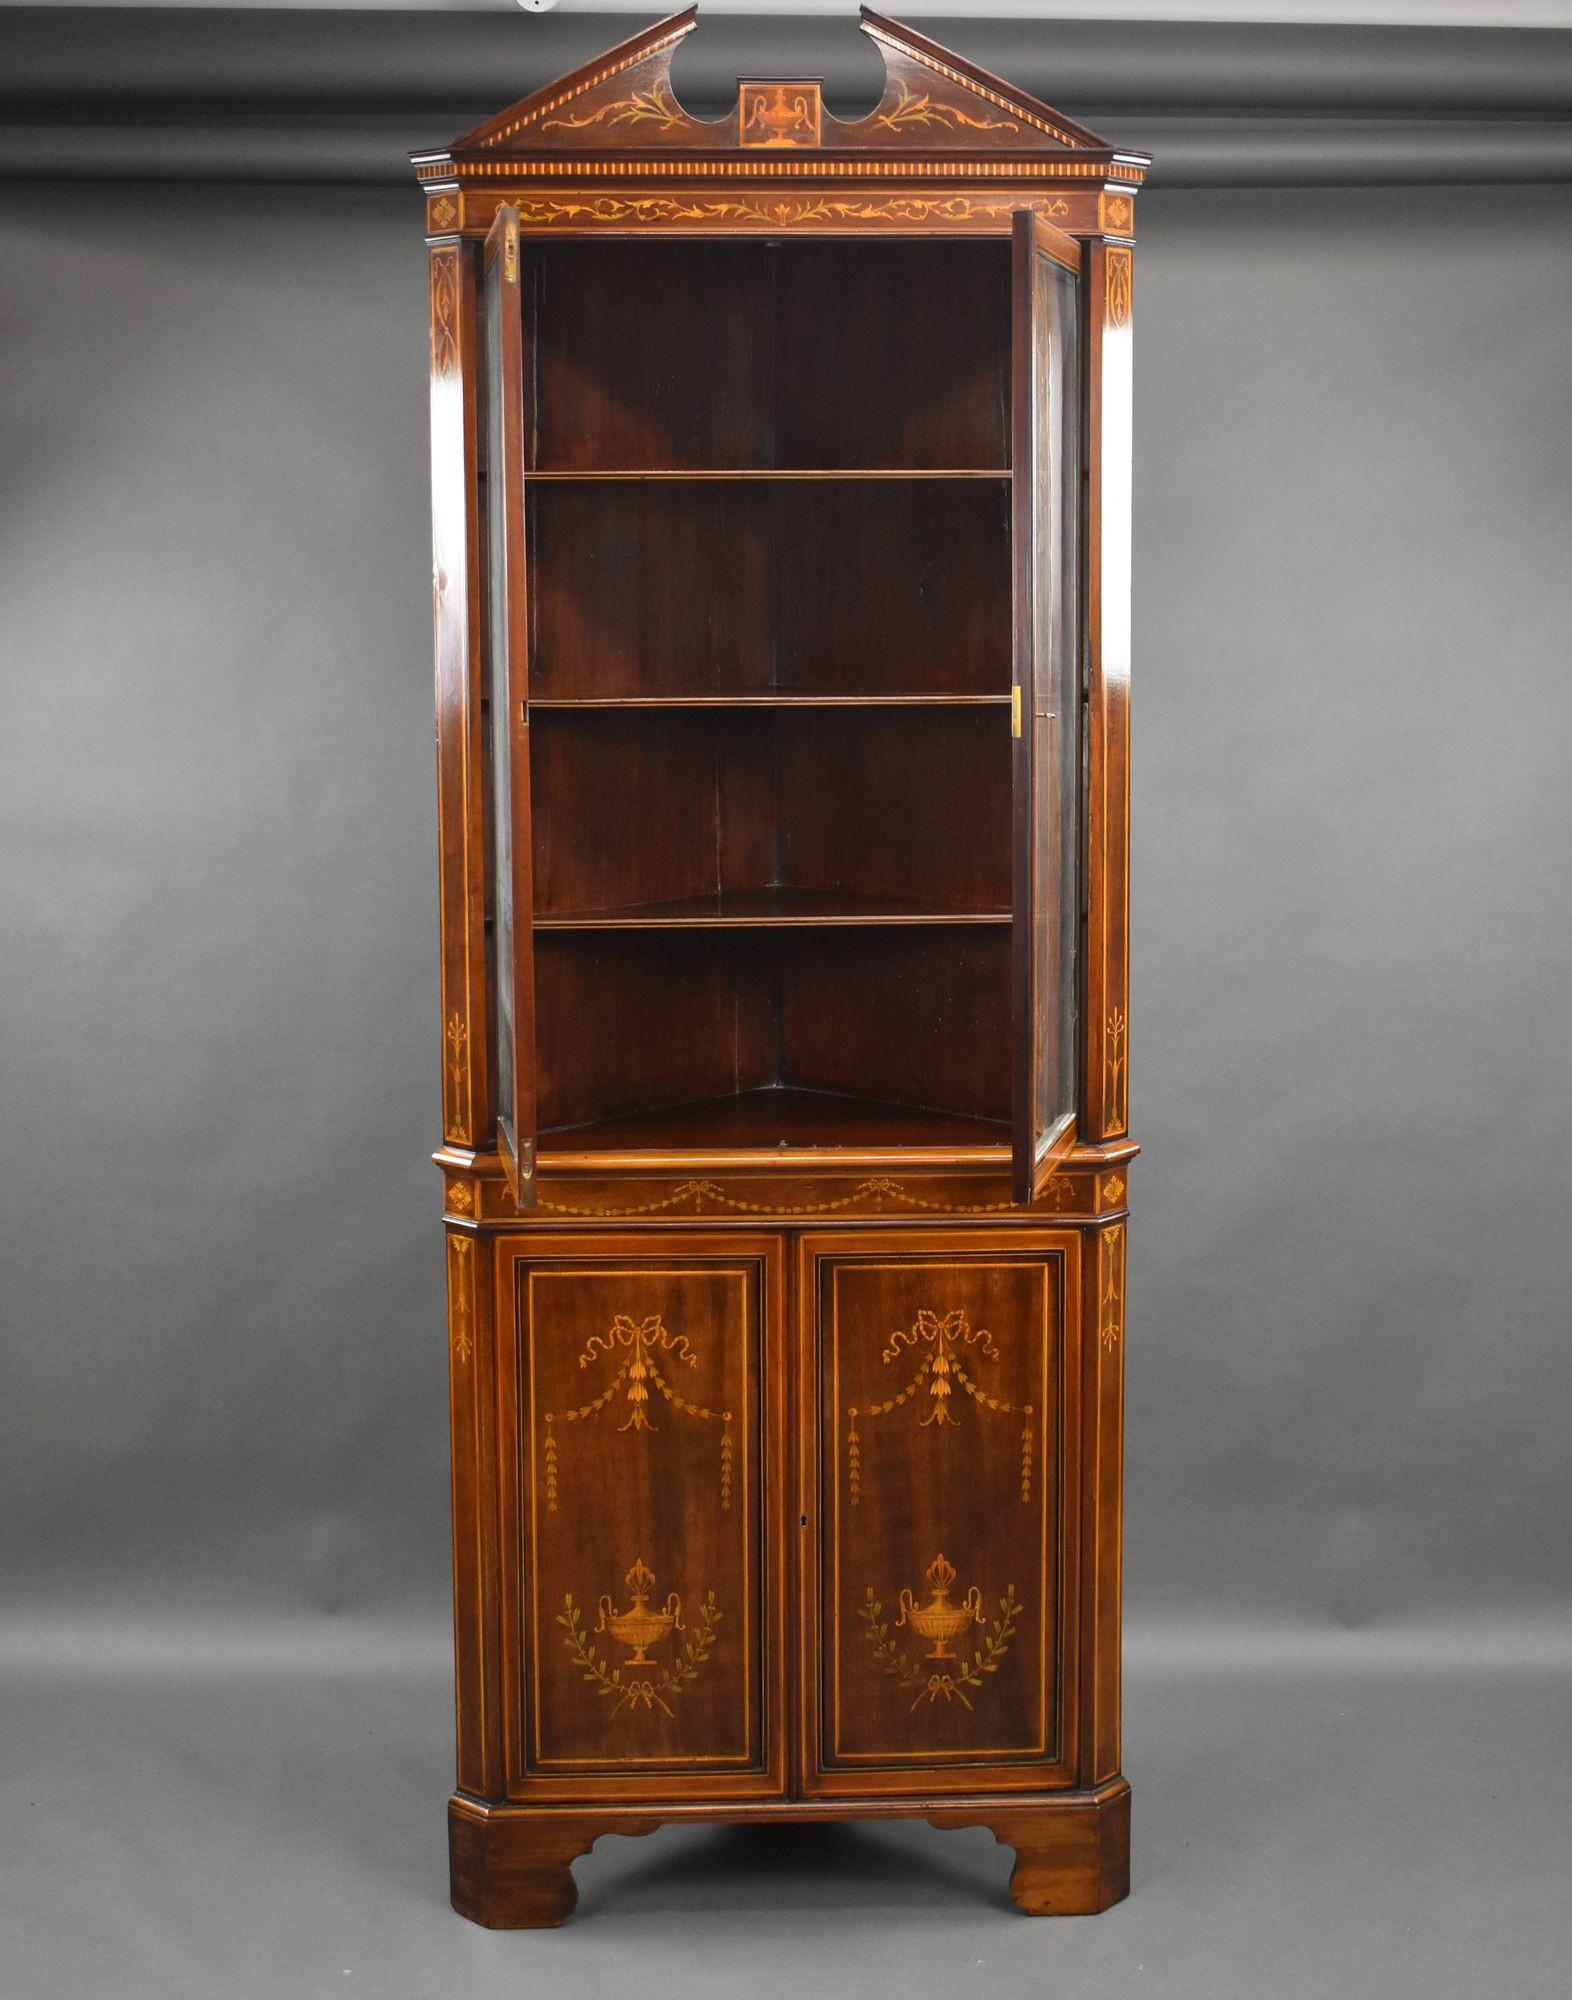 Edwardian Mahogany Inlaid Corner Cabinet In Good Condition For Sale In Chelmsford, Essex